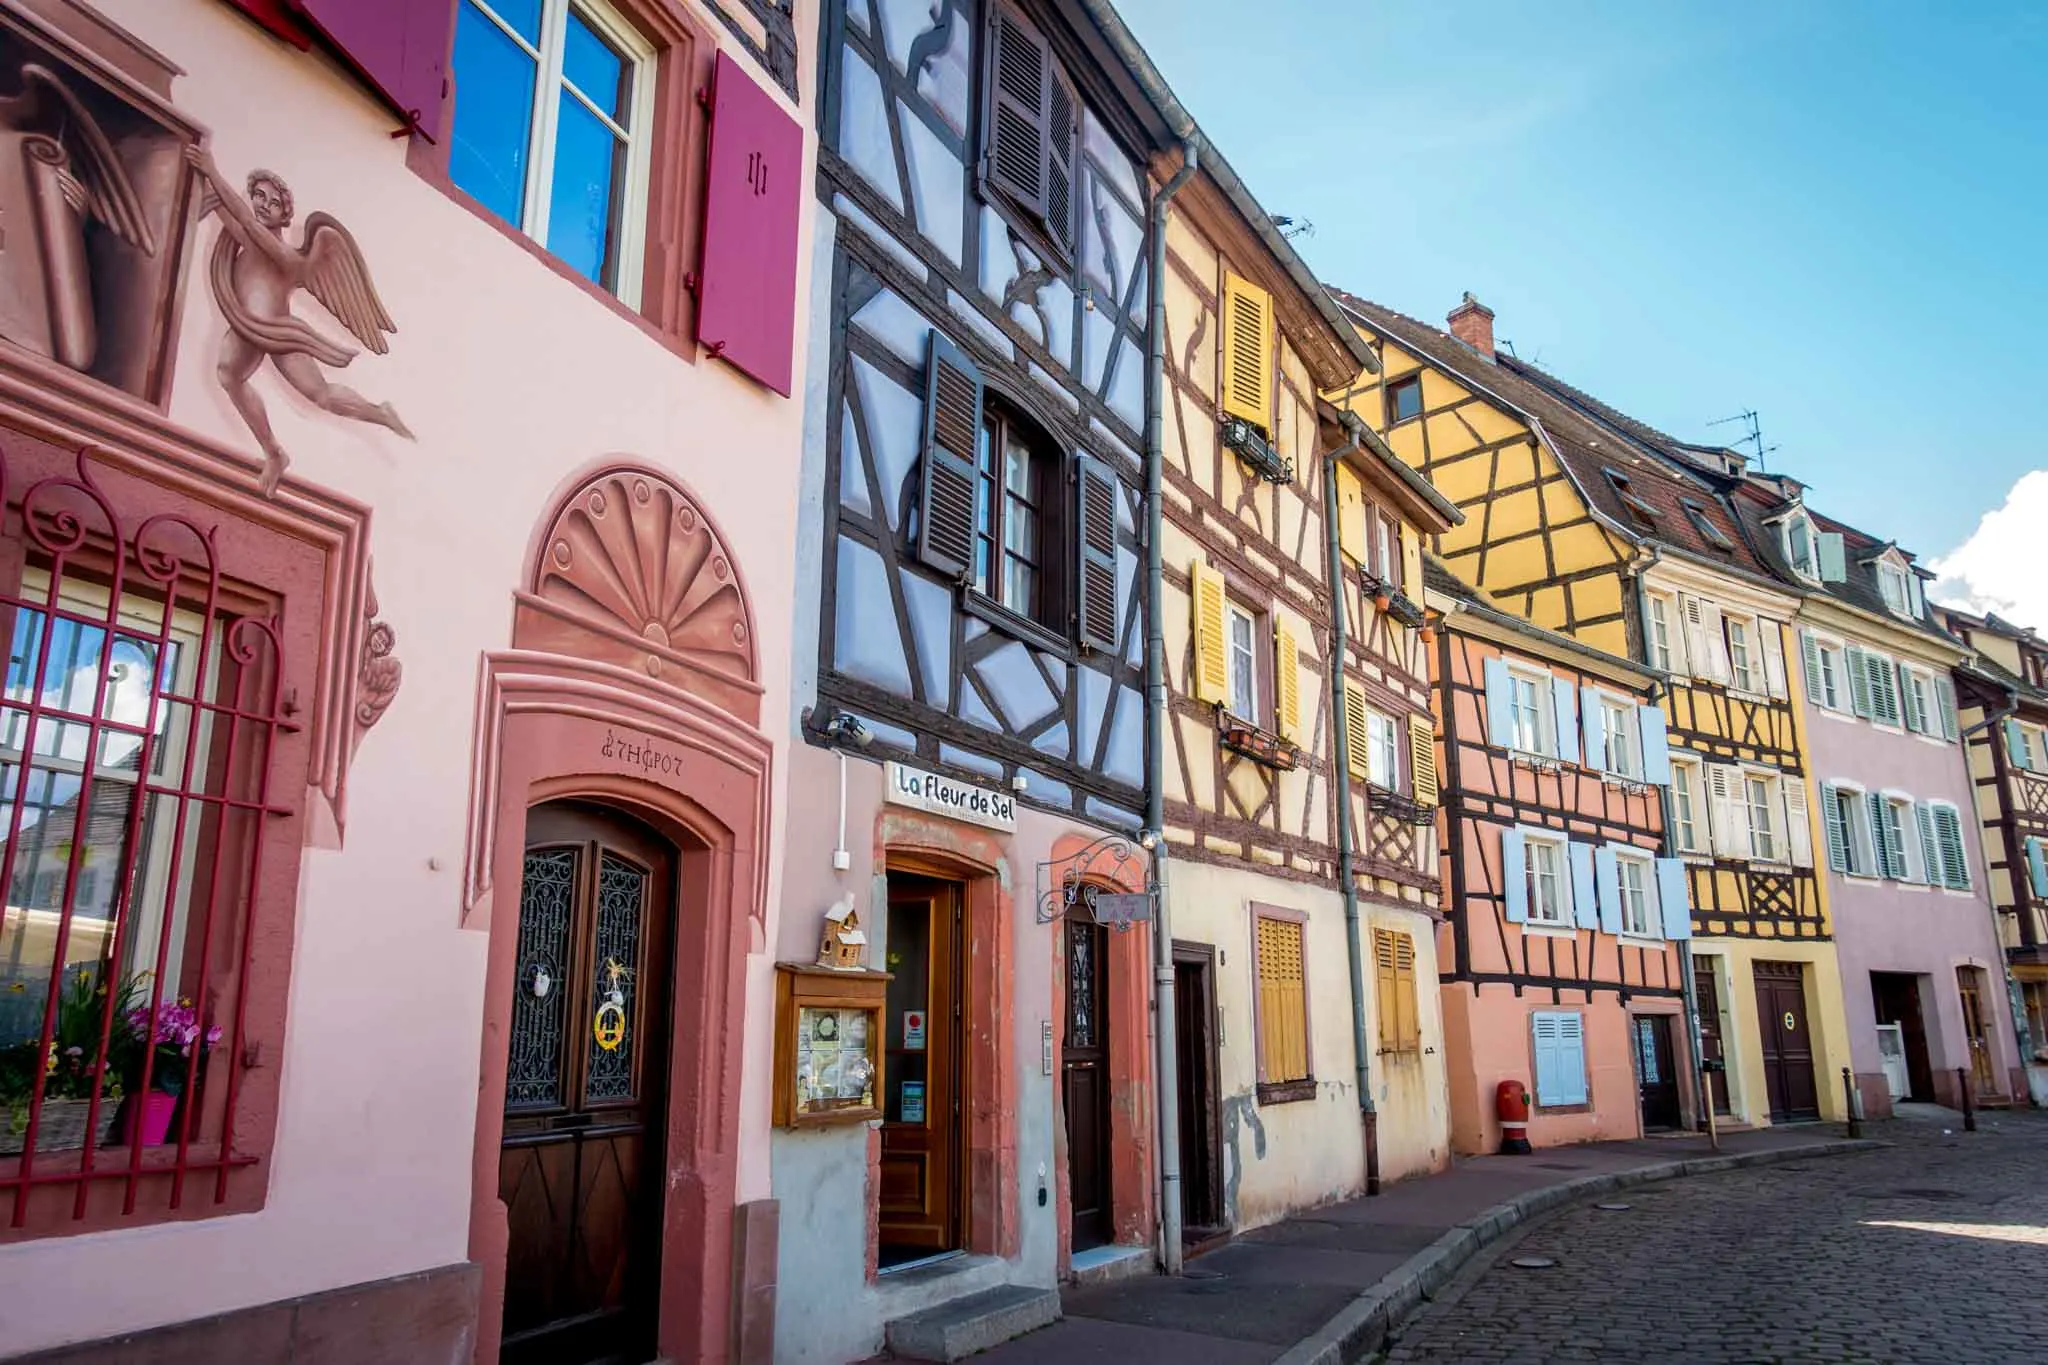 Row of half-timbered buildings painted pink, purple, and yellow